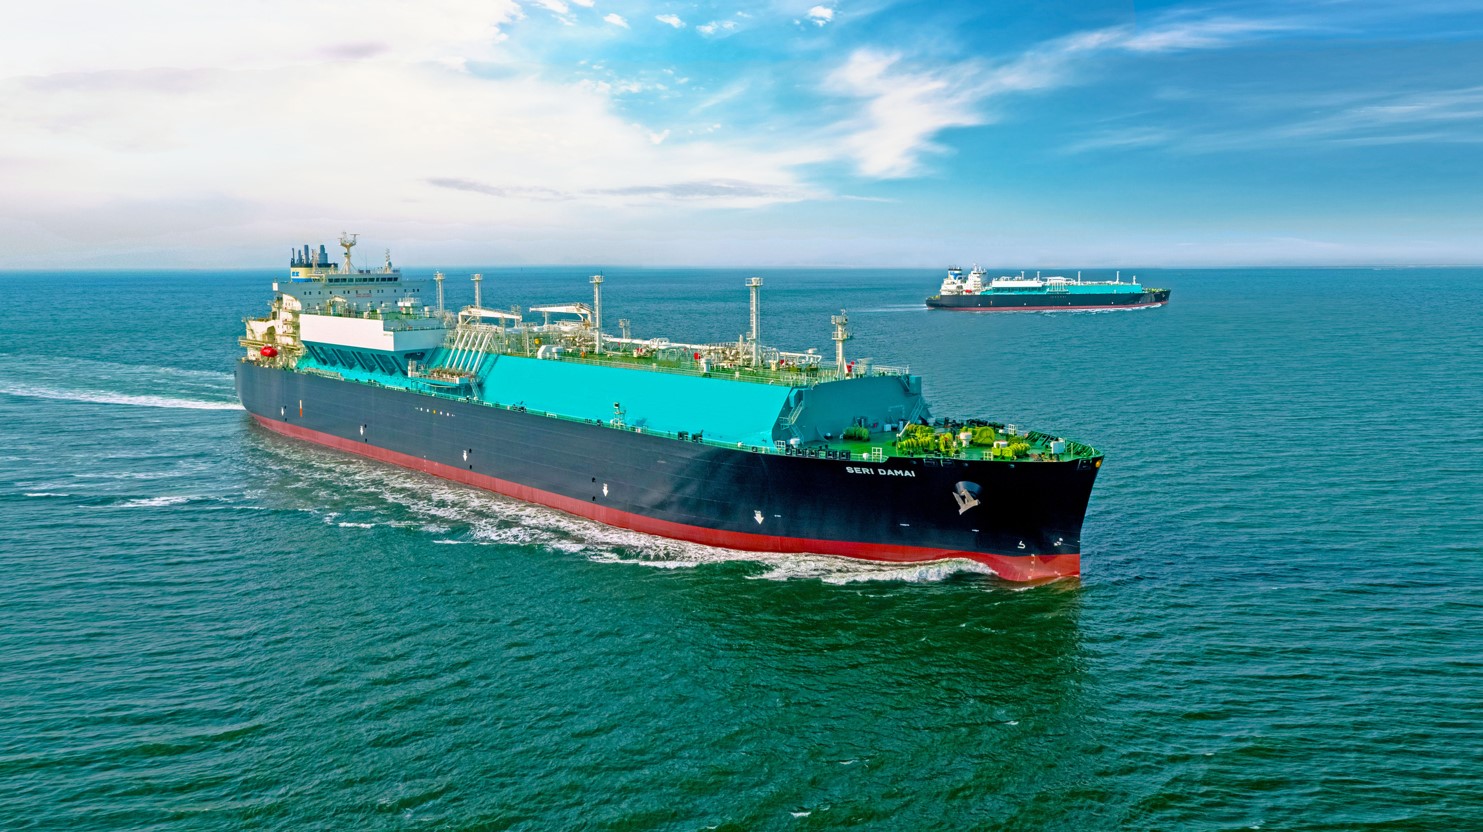 Malaysia's MISC takes delivery of LNG carrier duo chartered by ExxonMobil